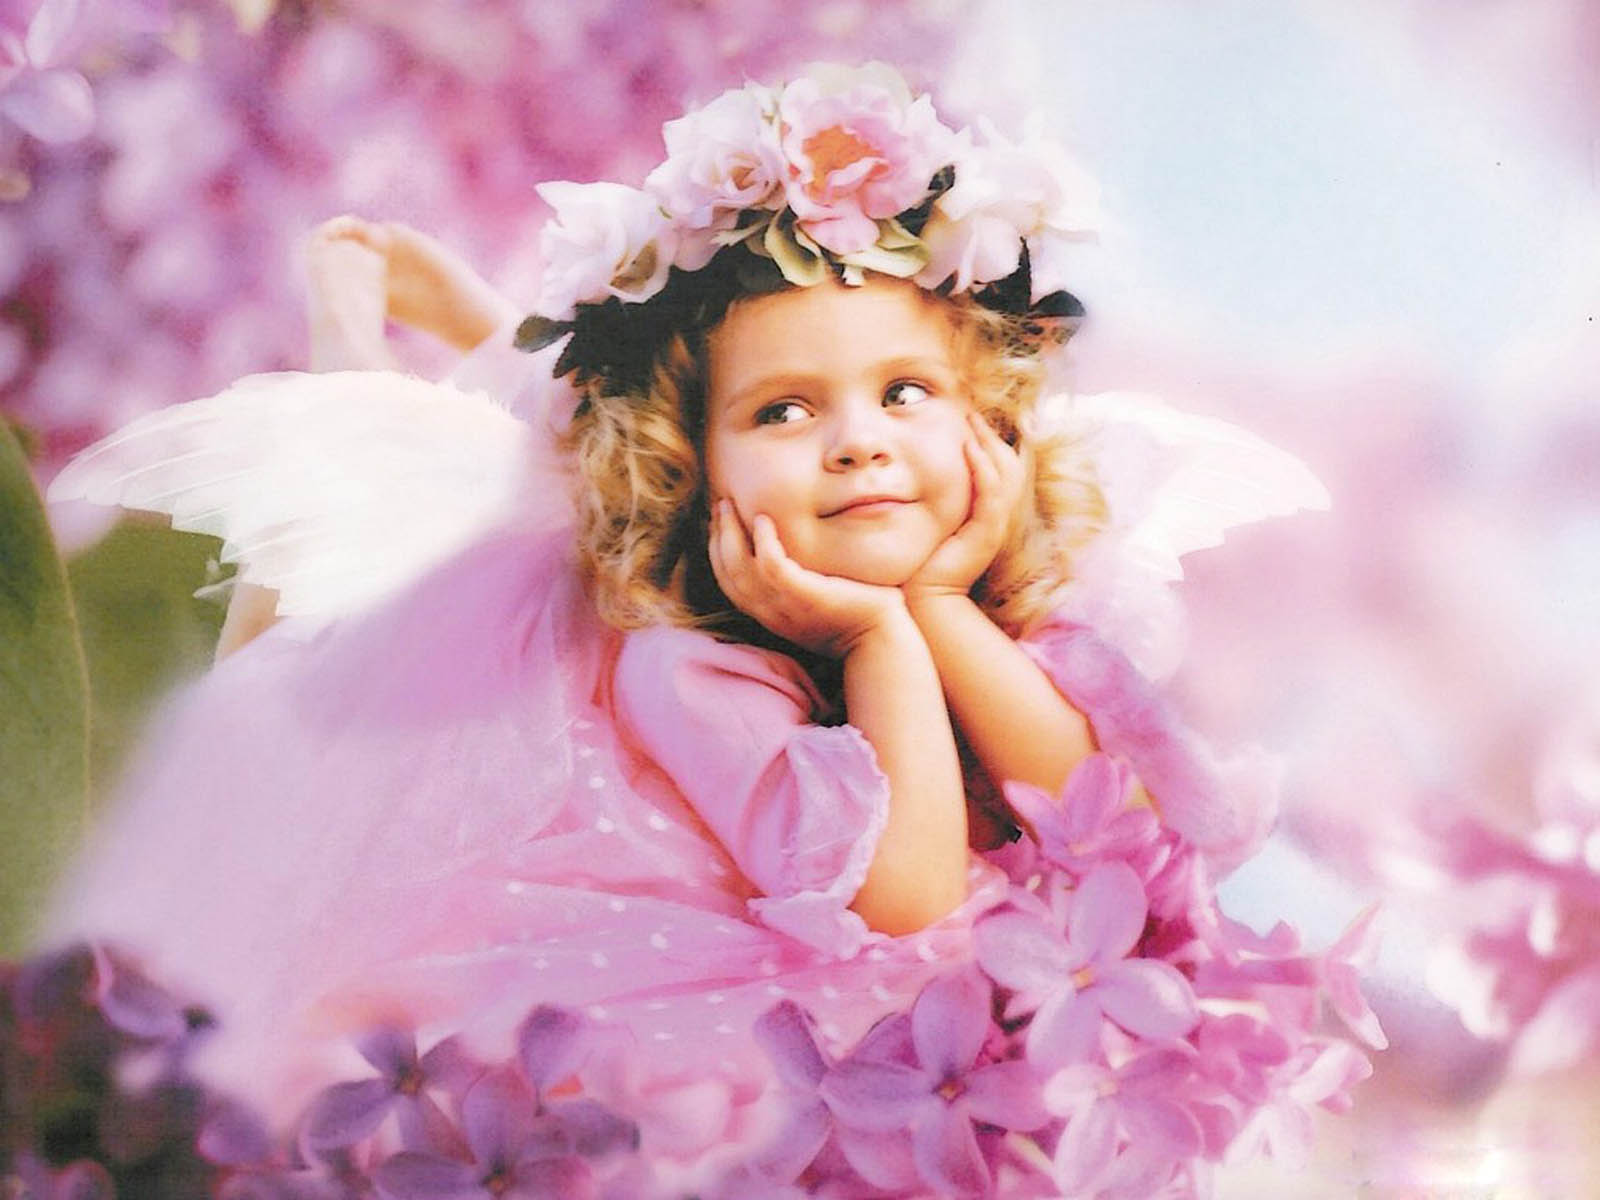 Background Angel Babies Photos Image And Pictures